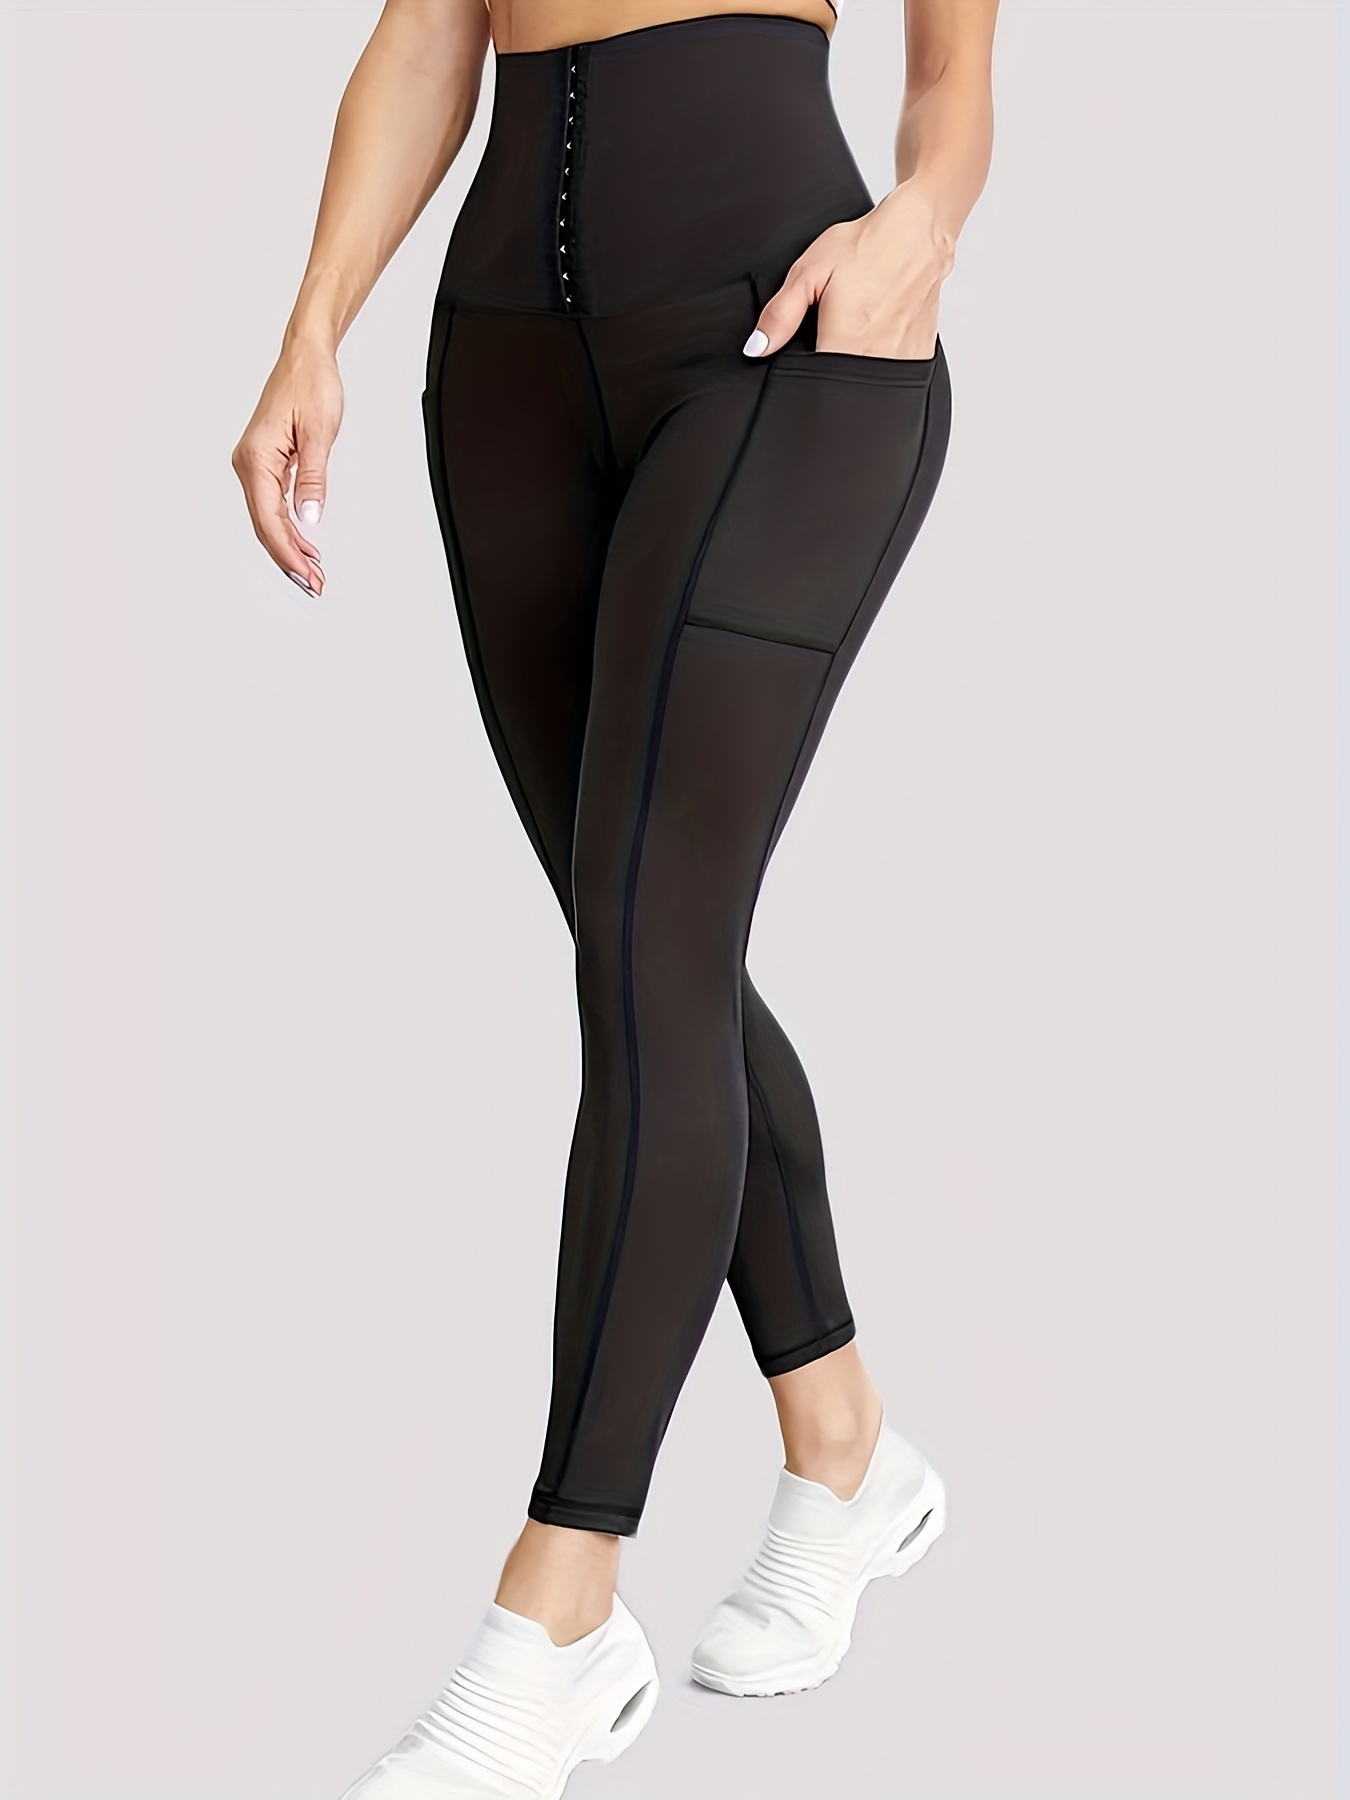 Yoga Pants Women with Pocket Plus Size Leggings with Tummy Control